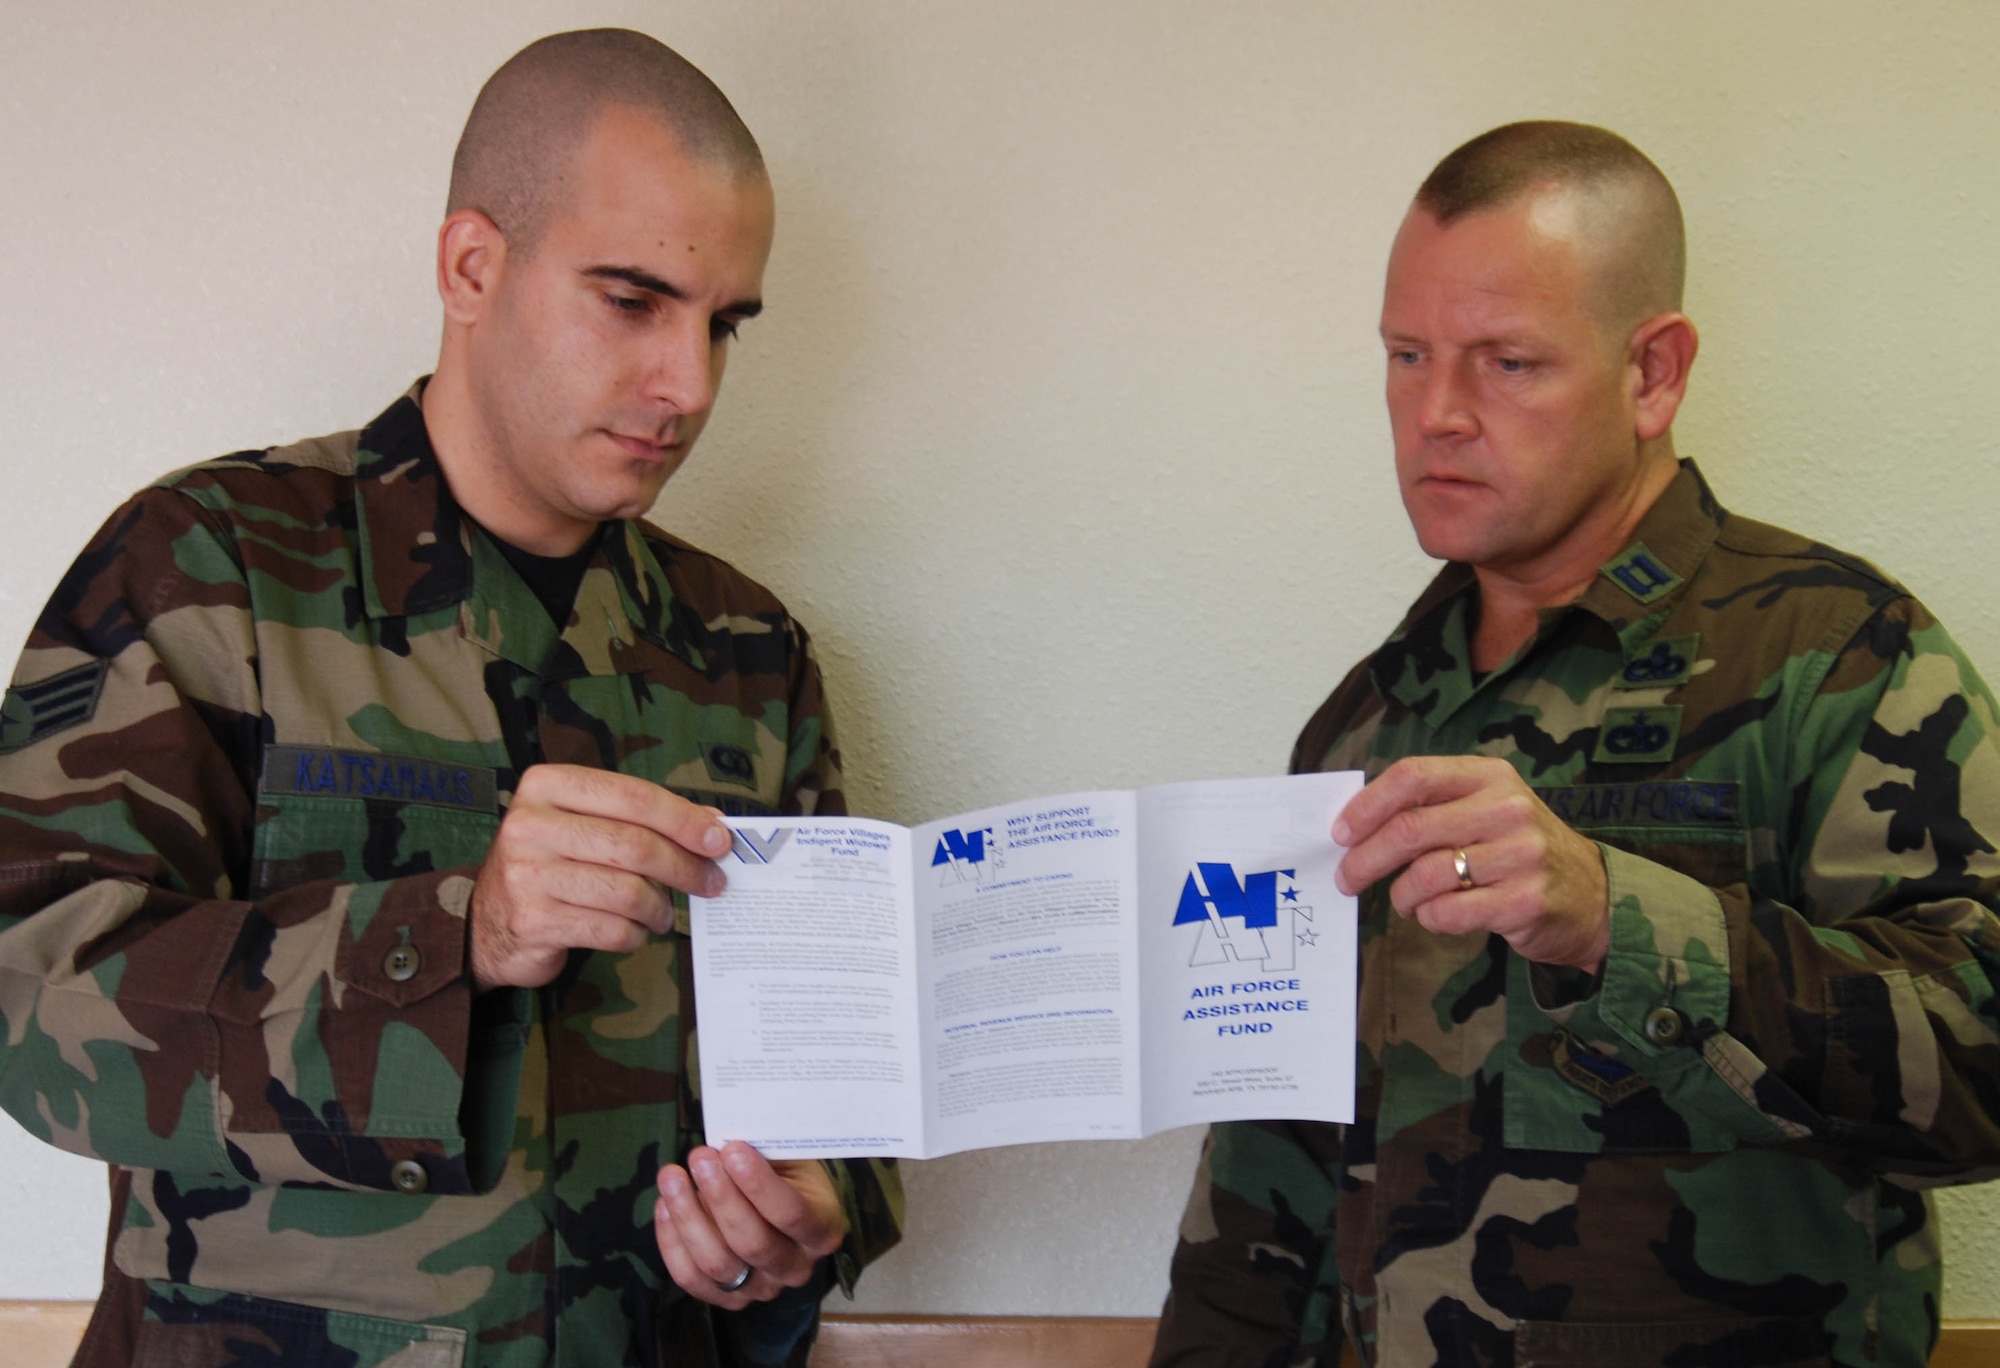 Senior Airman George Katsamakis, from the 36th Operations Support Squadron, and Capt. John Creighton, from the 506th Expeditionary Air Refueling Squadron, review the Air Force Assistance Fund pamphlet.   Both are AFAF unit project officers.  The AFAF campaign ends April 15. ( Photo by Airman Basic Evan Carter/36th Wing Public Affairs)